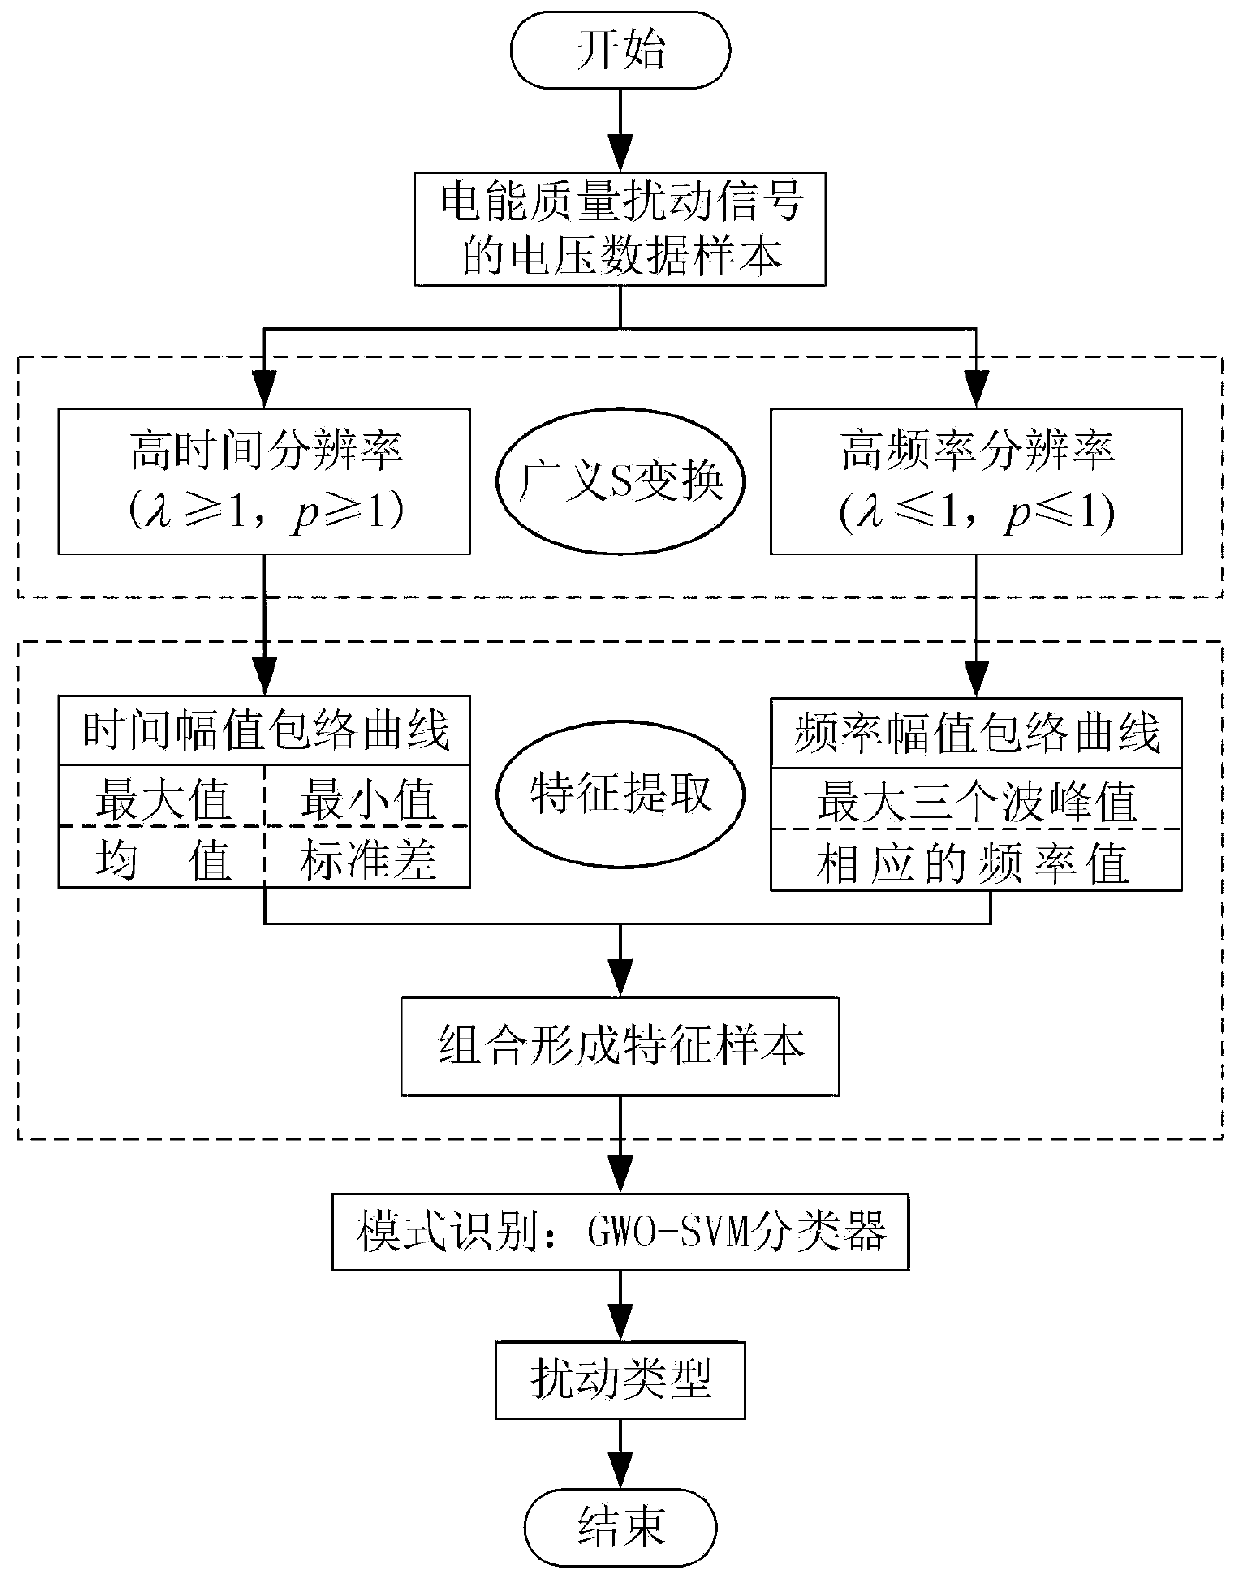 Generalized S transformation and SVM electric energy quality disturbance efficient identification method